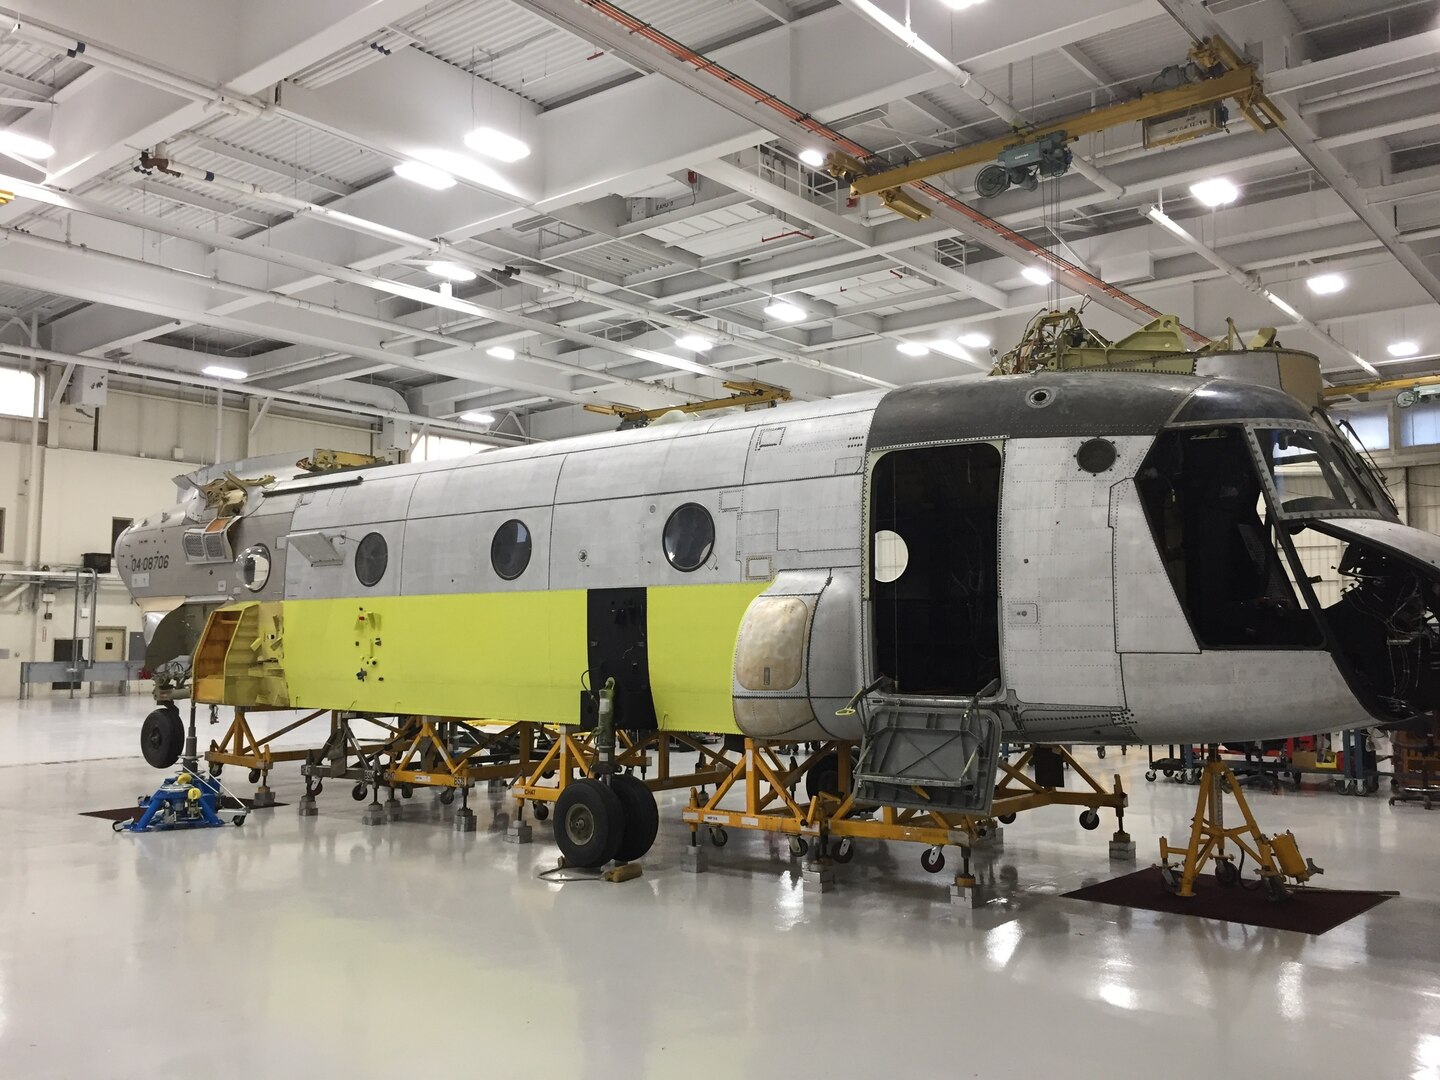 The shell of a CH-47 Chinook helicopter that was battle-damaged from a hard landing while serving in Iraq sits in the maintenance bay of the Connecticut National Guard's 1109th Theater Aviation Support Maintenance Group in Groton, Conn., Sept. 3, 2019. The restoration of the aircraft was part of an initiative by the unit to restore inoperable aircraft and get them back in the Army's operational fleet.